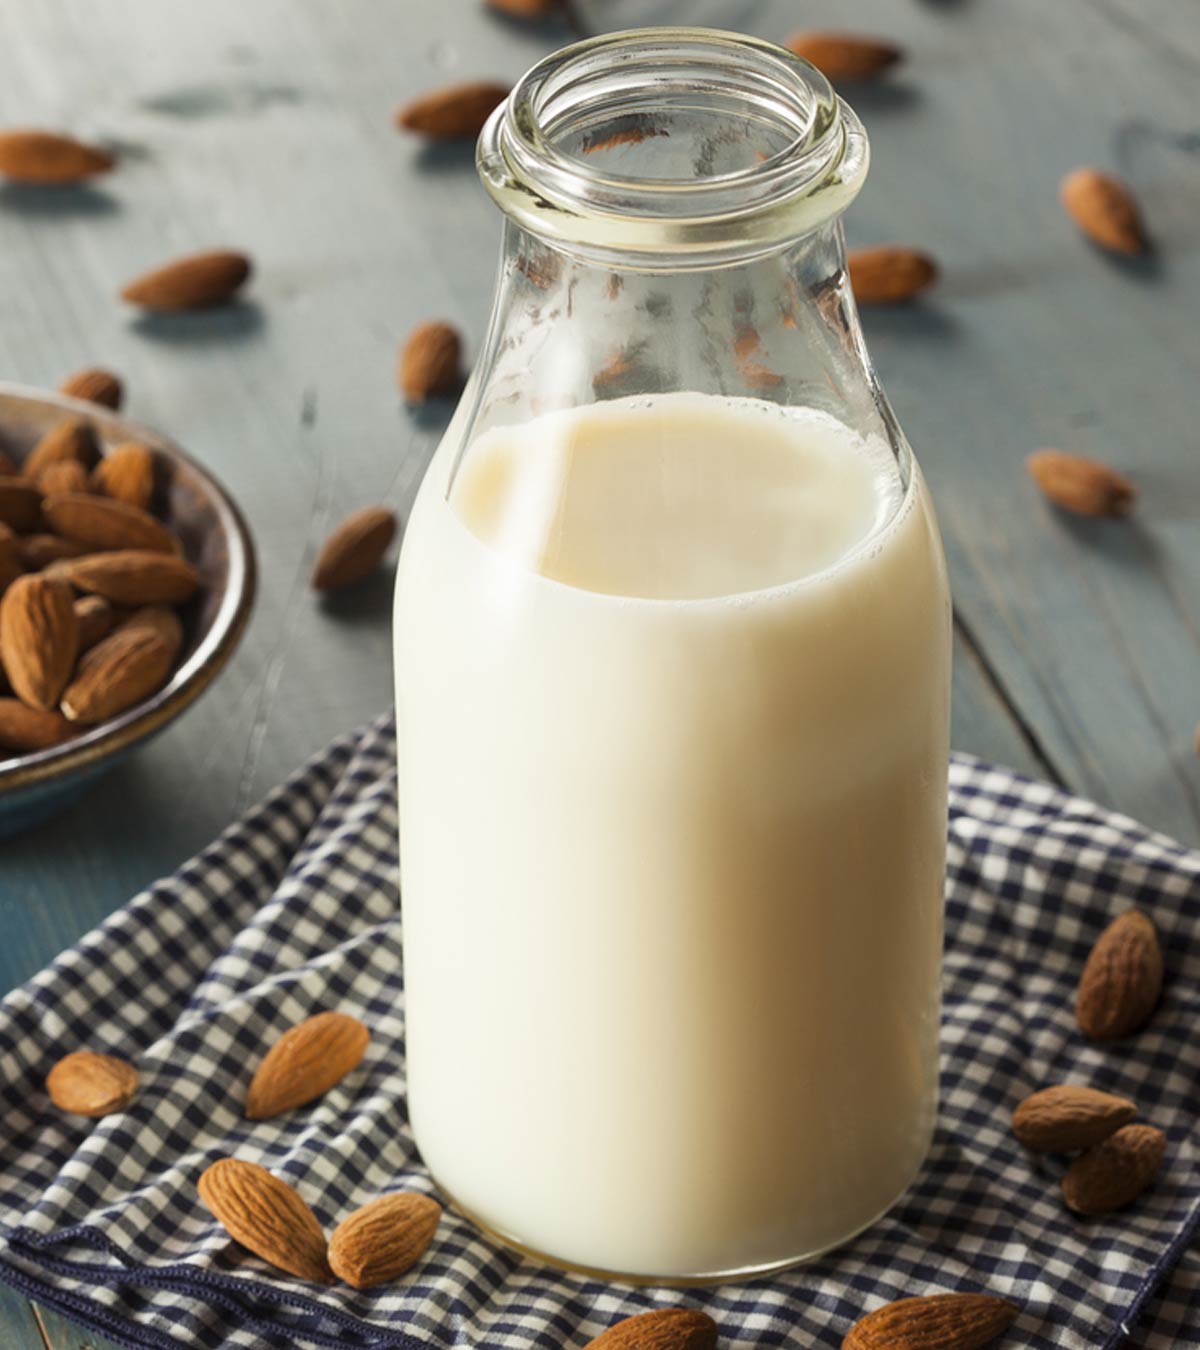 Can Babies Have Almond Milk? When To Introduce And How To Make